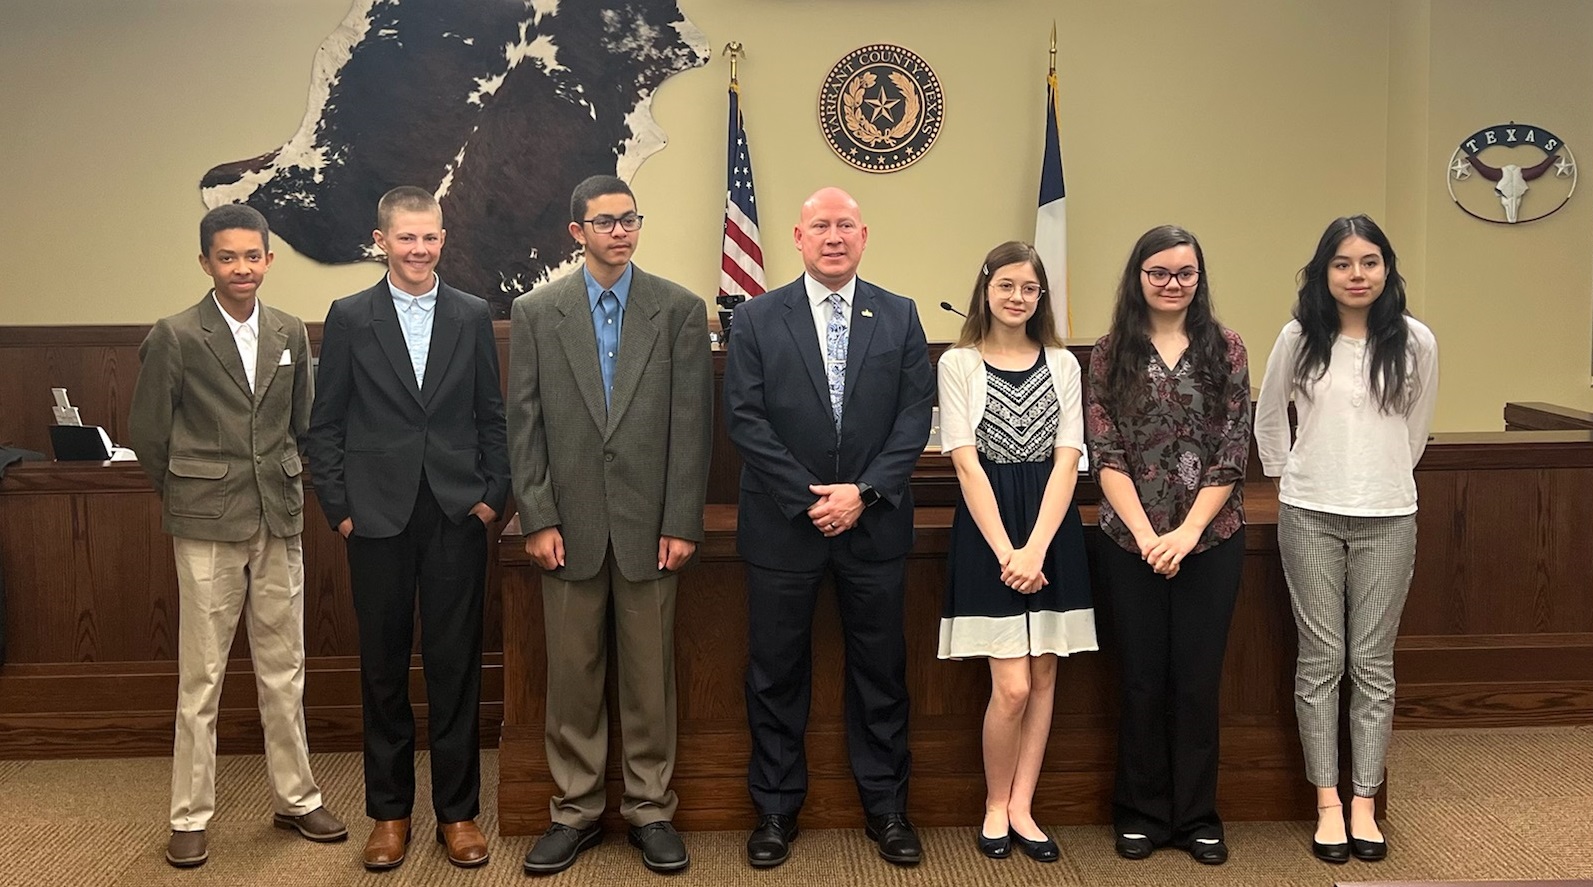 PHOTO OF A JUDGE WITH SIX STUDENTS